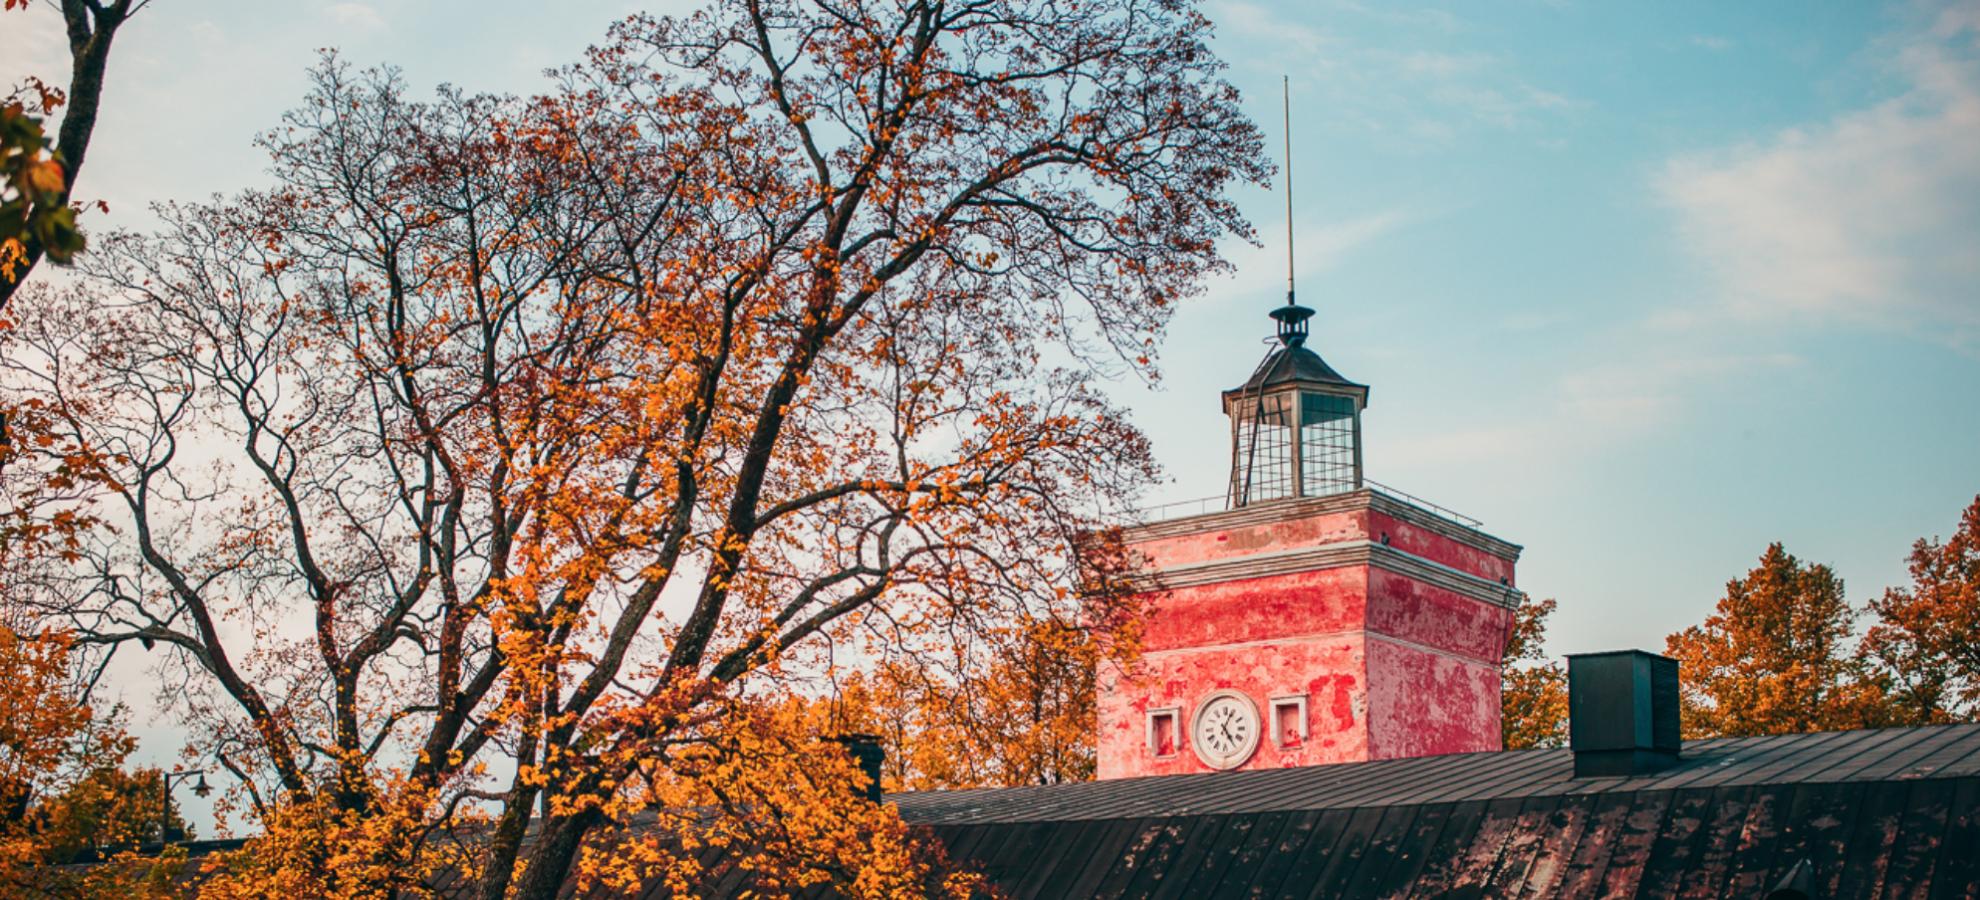 The pink building of the Jetty Barracks Gallery on Suomenlinna stands behind a pair of tall trees losing their golden leaves on a clear autumn's day.